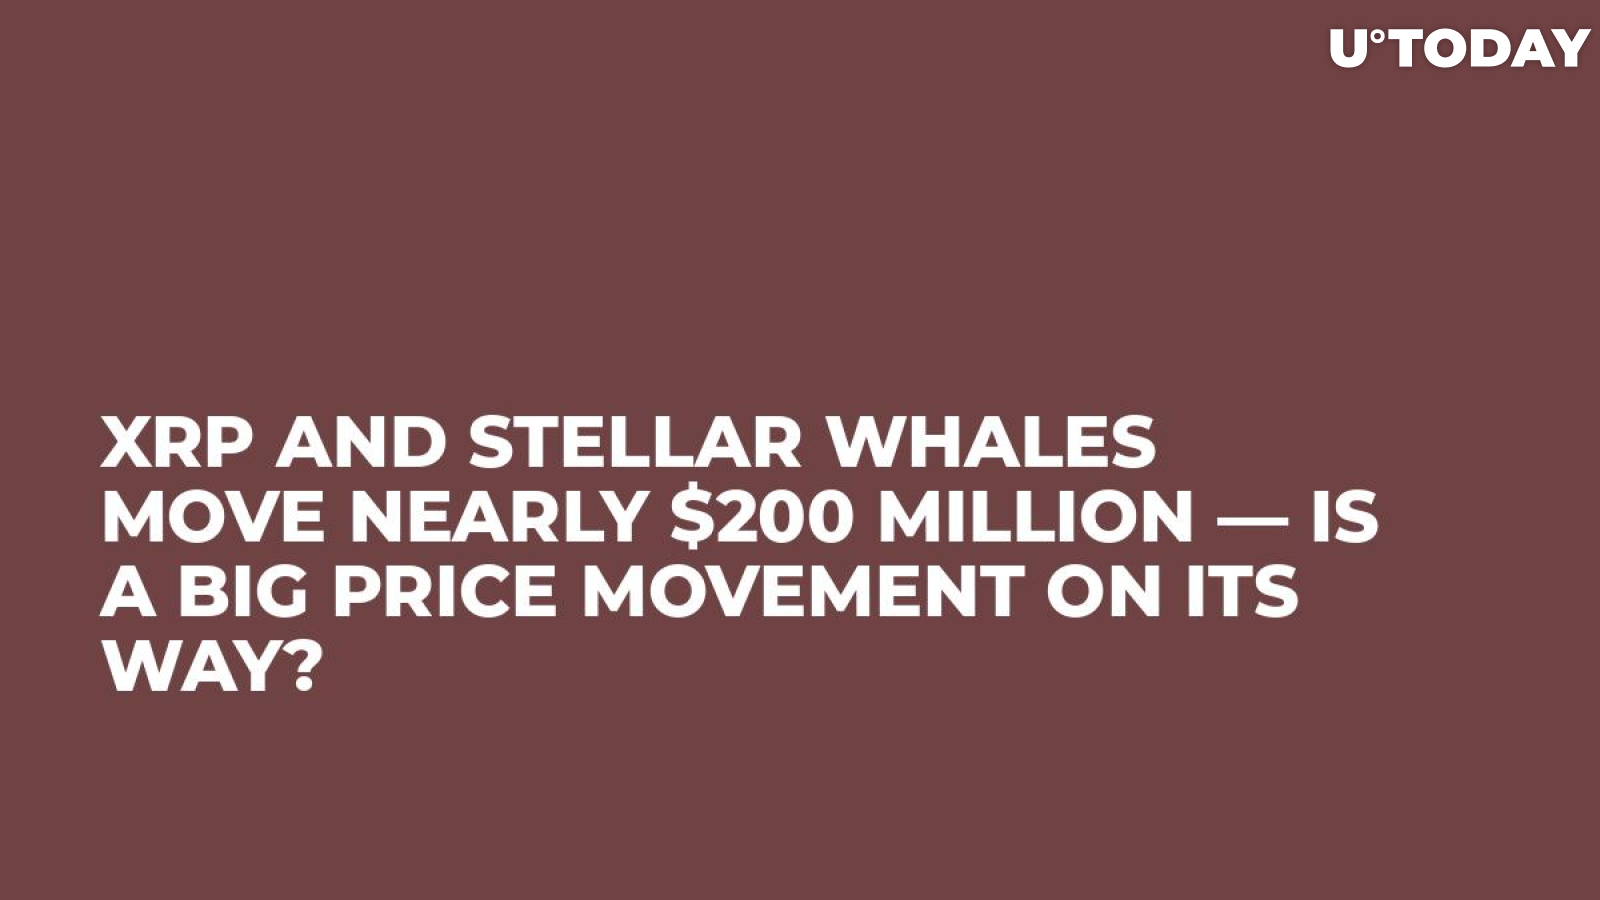 XRP and Stellar Whales Move Nearly $200 million — Is a Big Price Movement on Its Way?